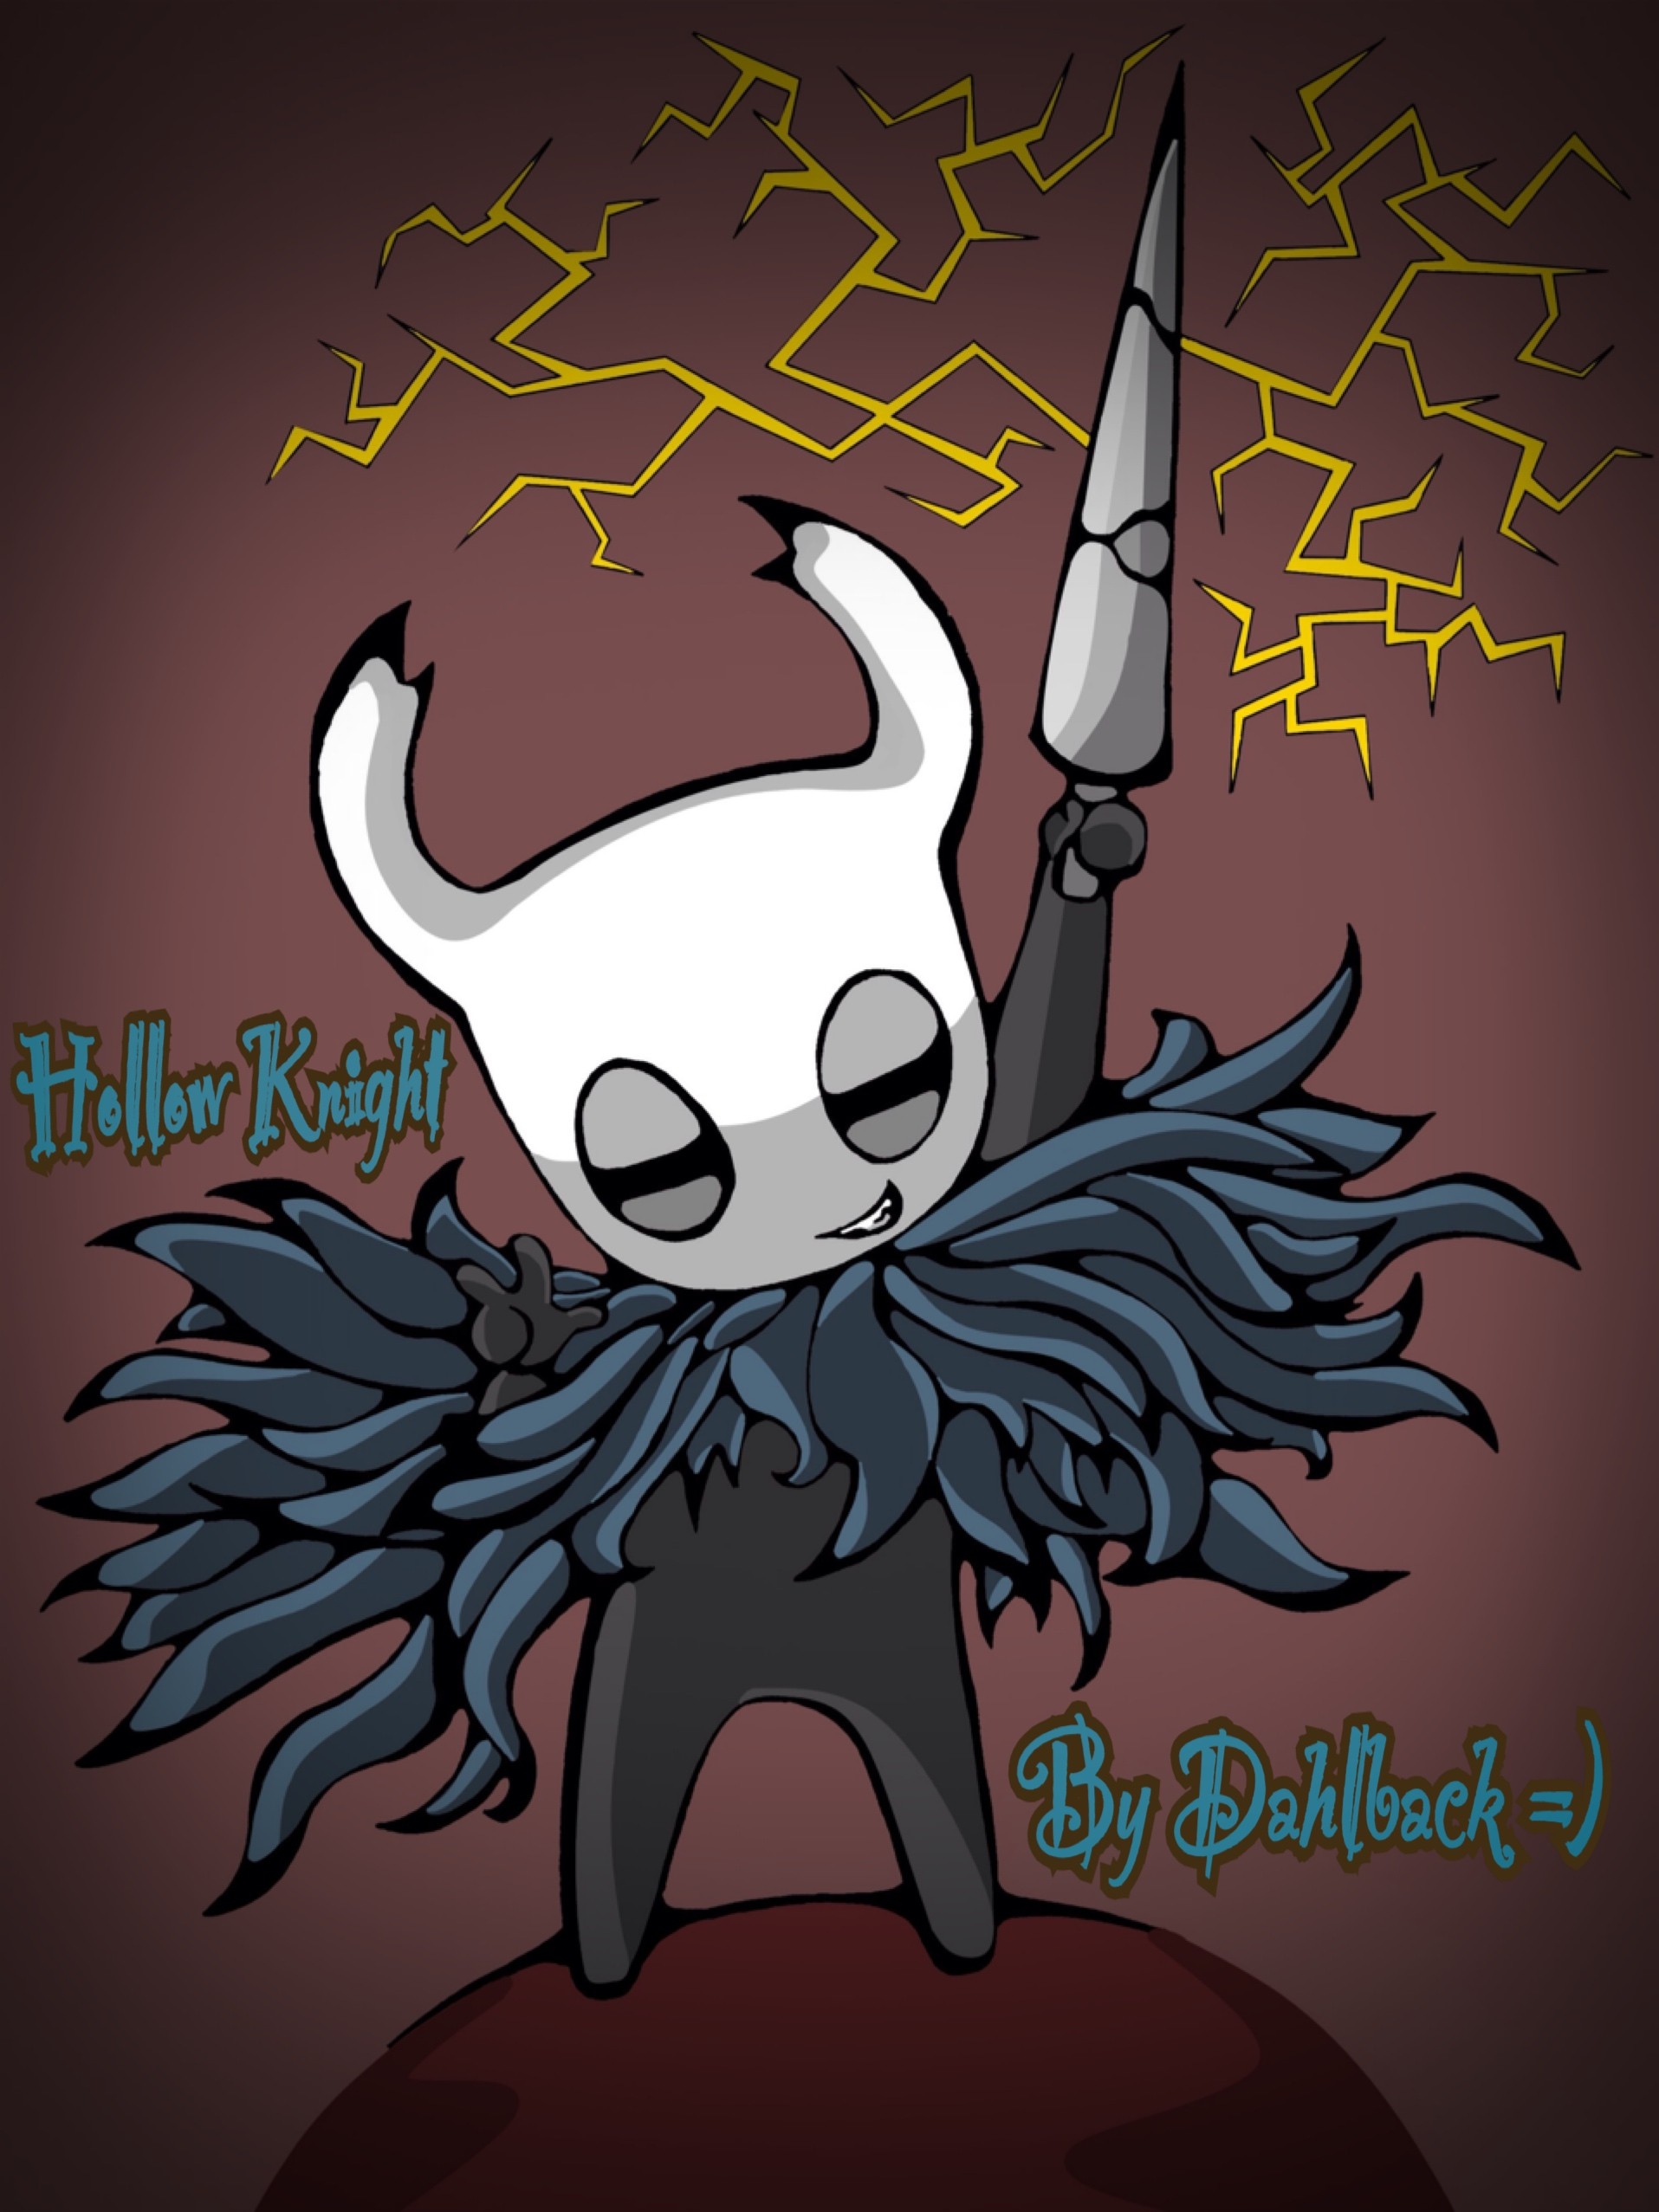 Cuphead. Bendy and The Ink Machine. Hollow Knight. DahlBack.